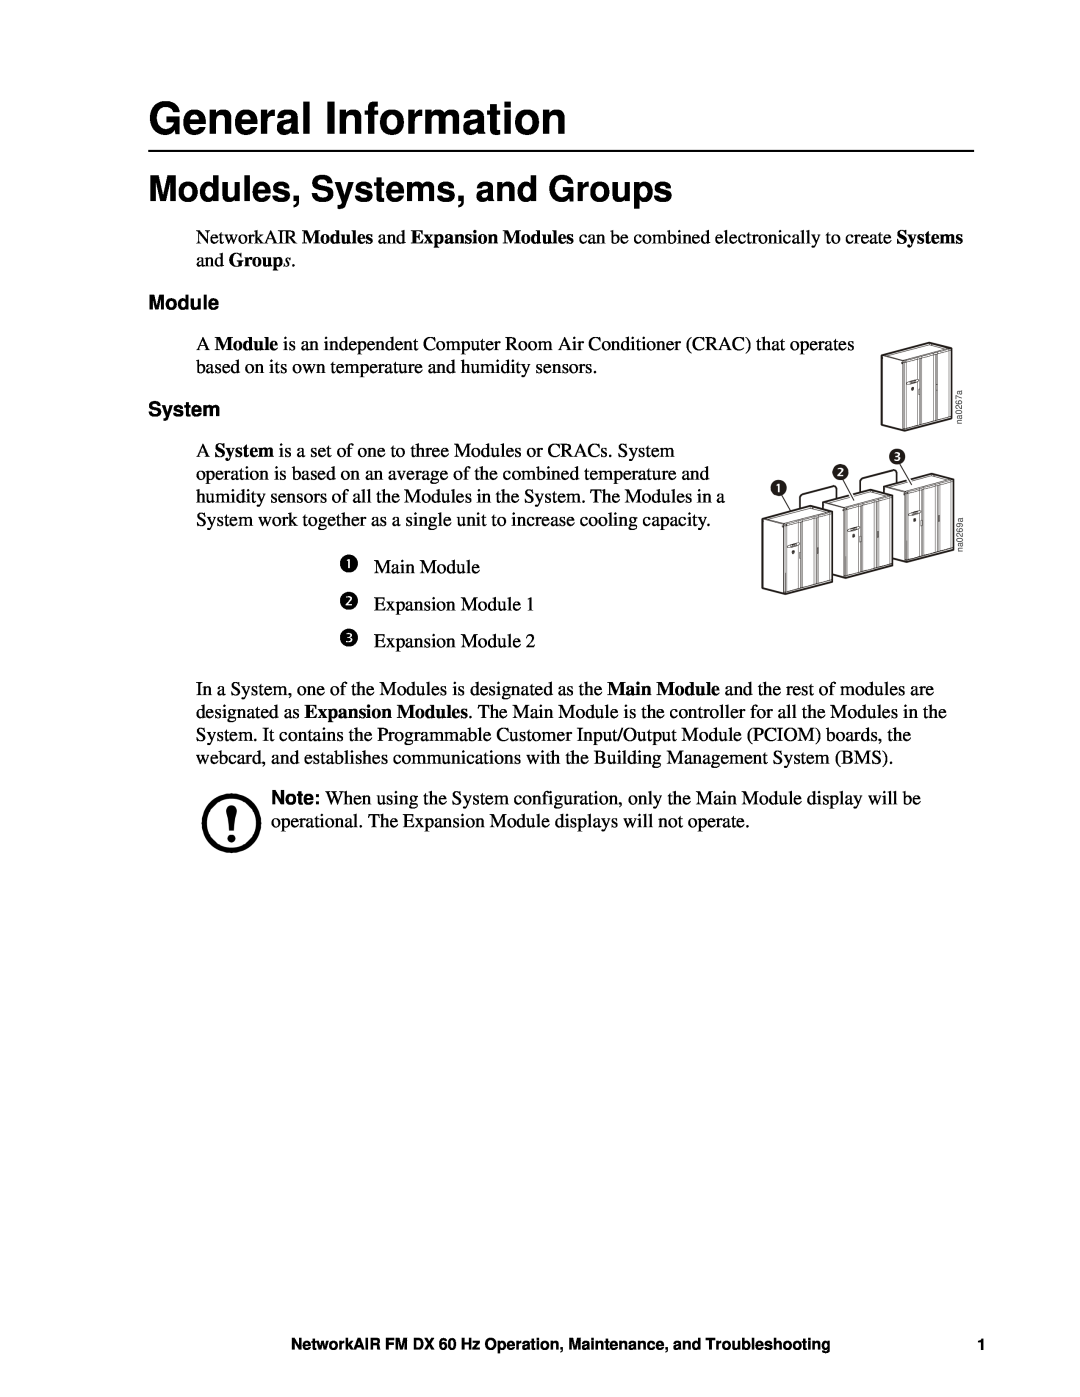 American Power Conversion FM, DX manual General Information, Modules, Systems, and Groups 